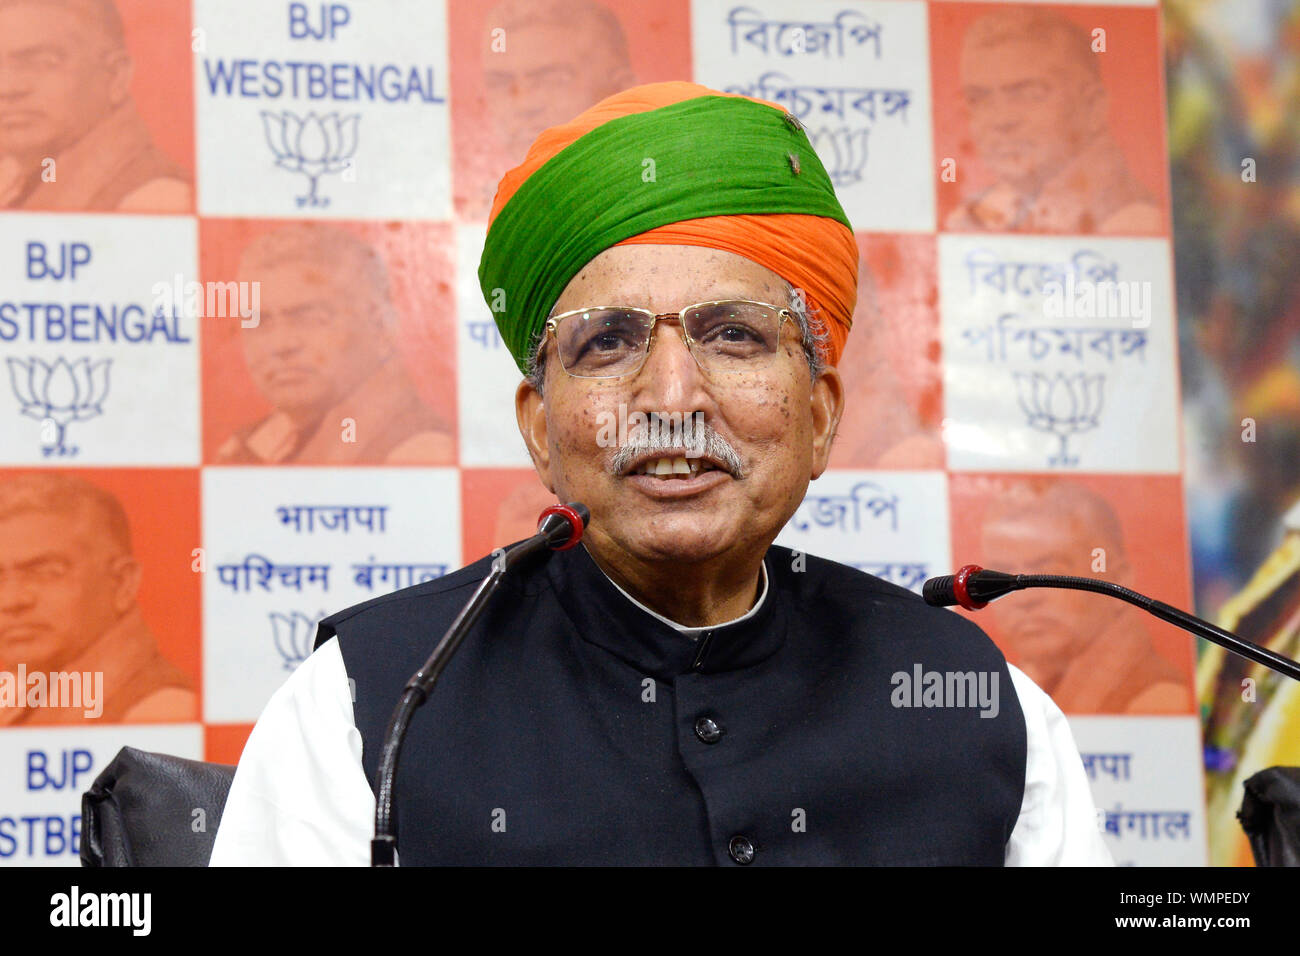 Kolkata, India. 05th Sep, 2019. Minister of state for Heavy Industries and Public Enterprise Arjun Ram Meghwal addresses a press conference at BJP head quarter. (Photo by Saikat Paul/Pacific Press) Credit: Pacific Press Agency/Alamy Live News Stock Photo